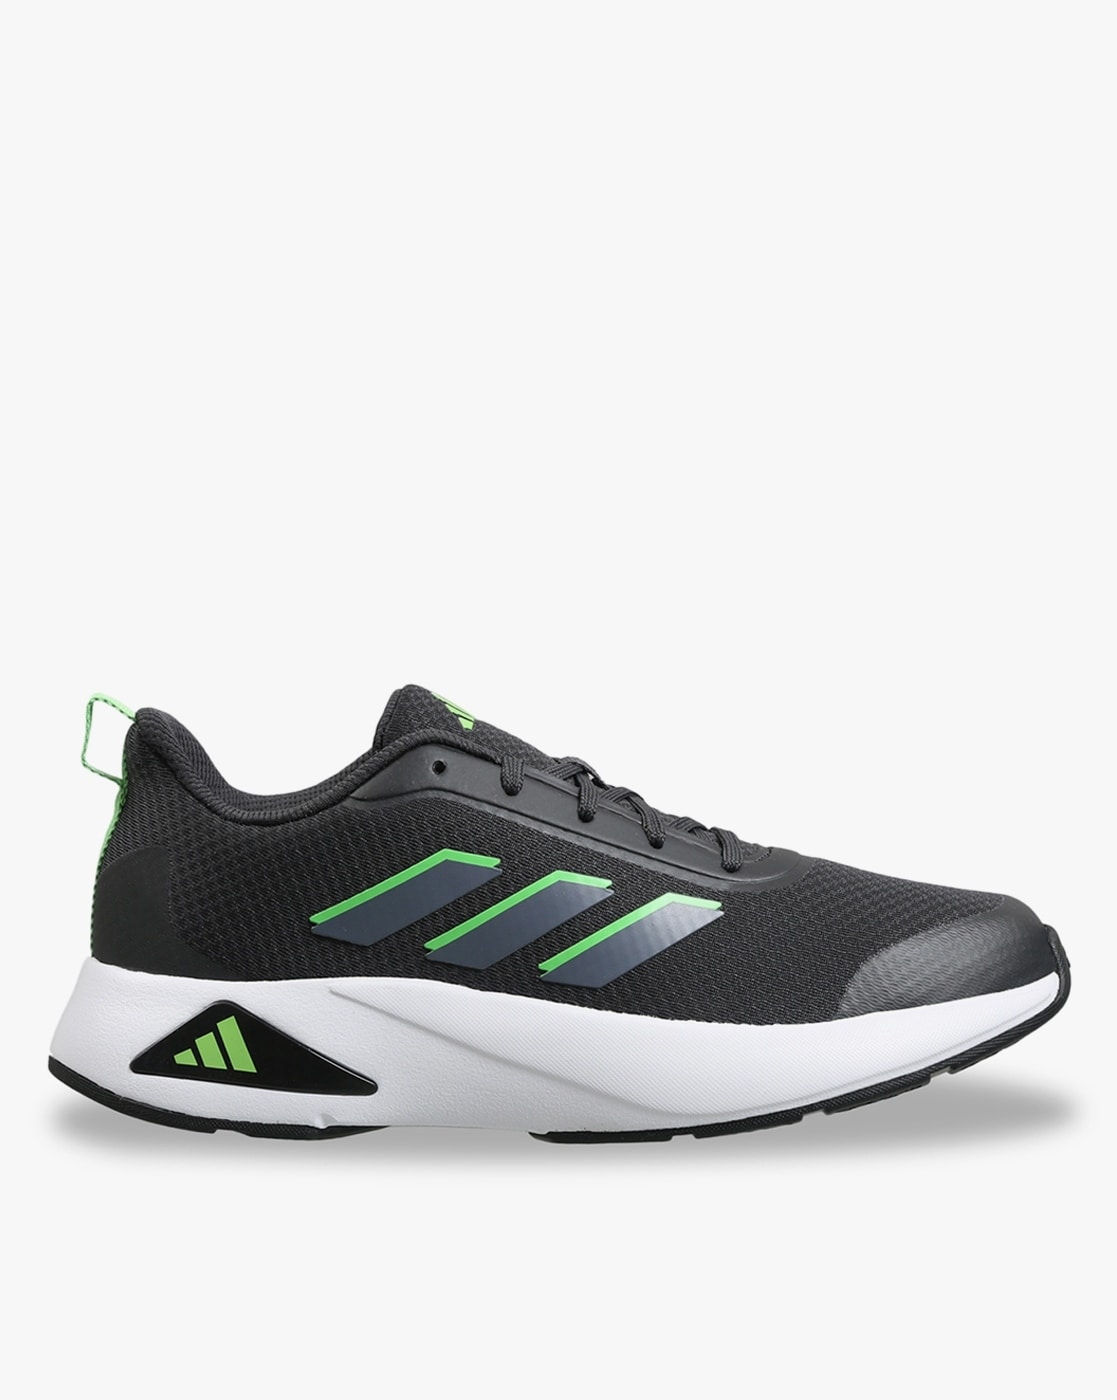 adidas | VS Pace Trainers Mens | Low Trainers | SportsDirect.com